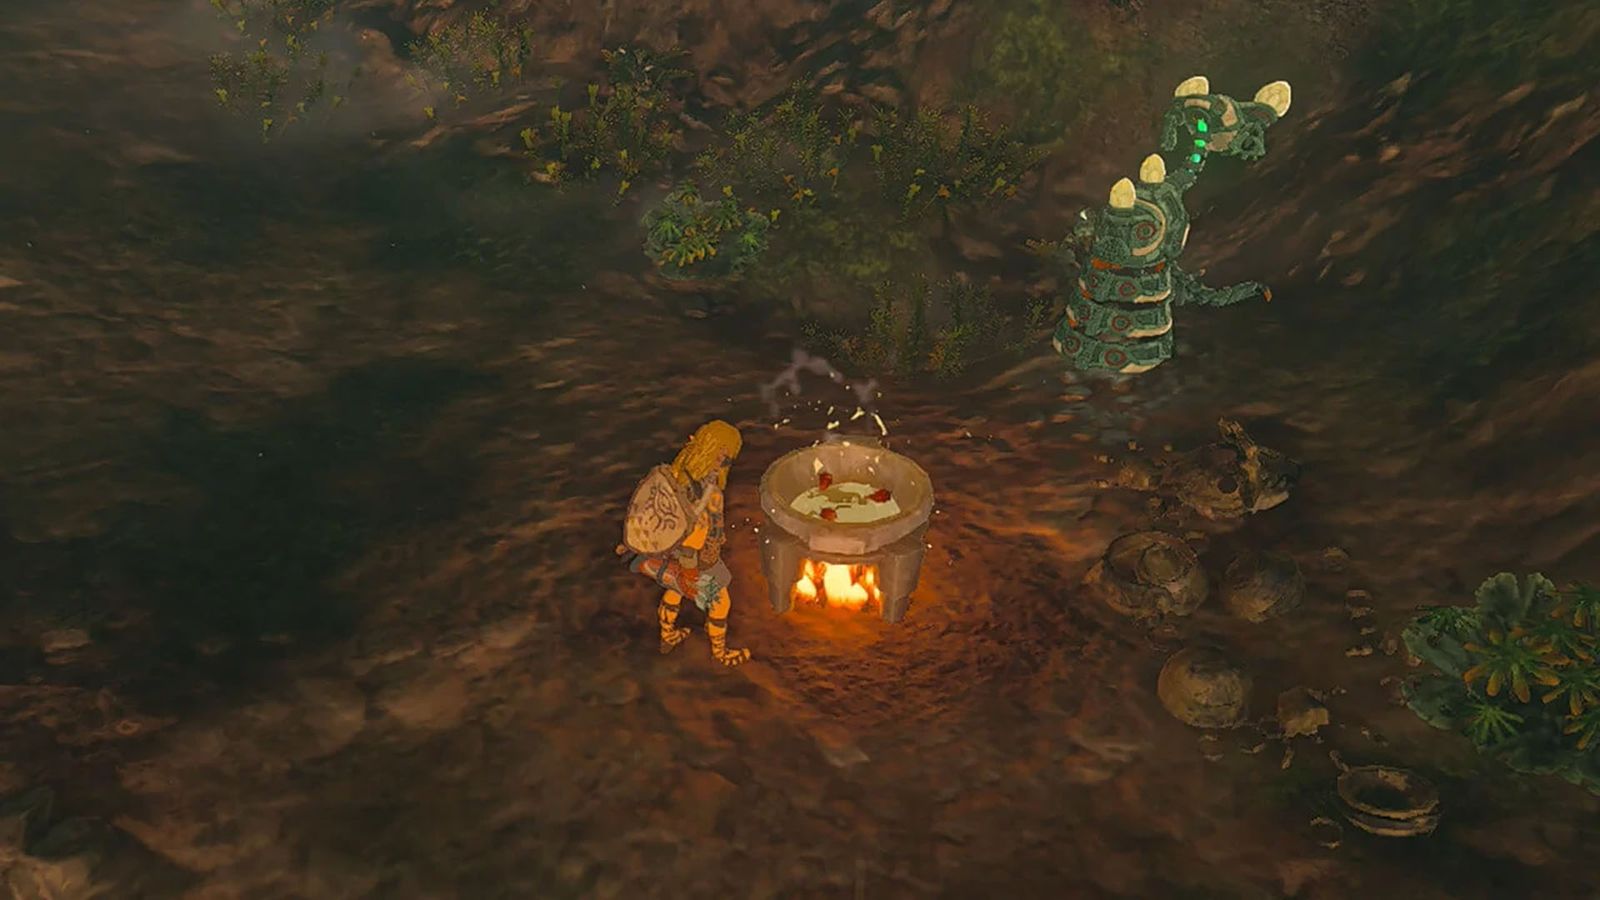 Screenshot of Zelda Tears of the Kingdom player using cooking pot with green plants nearby